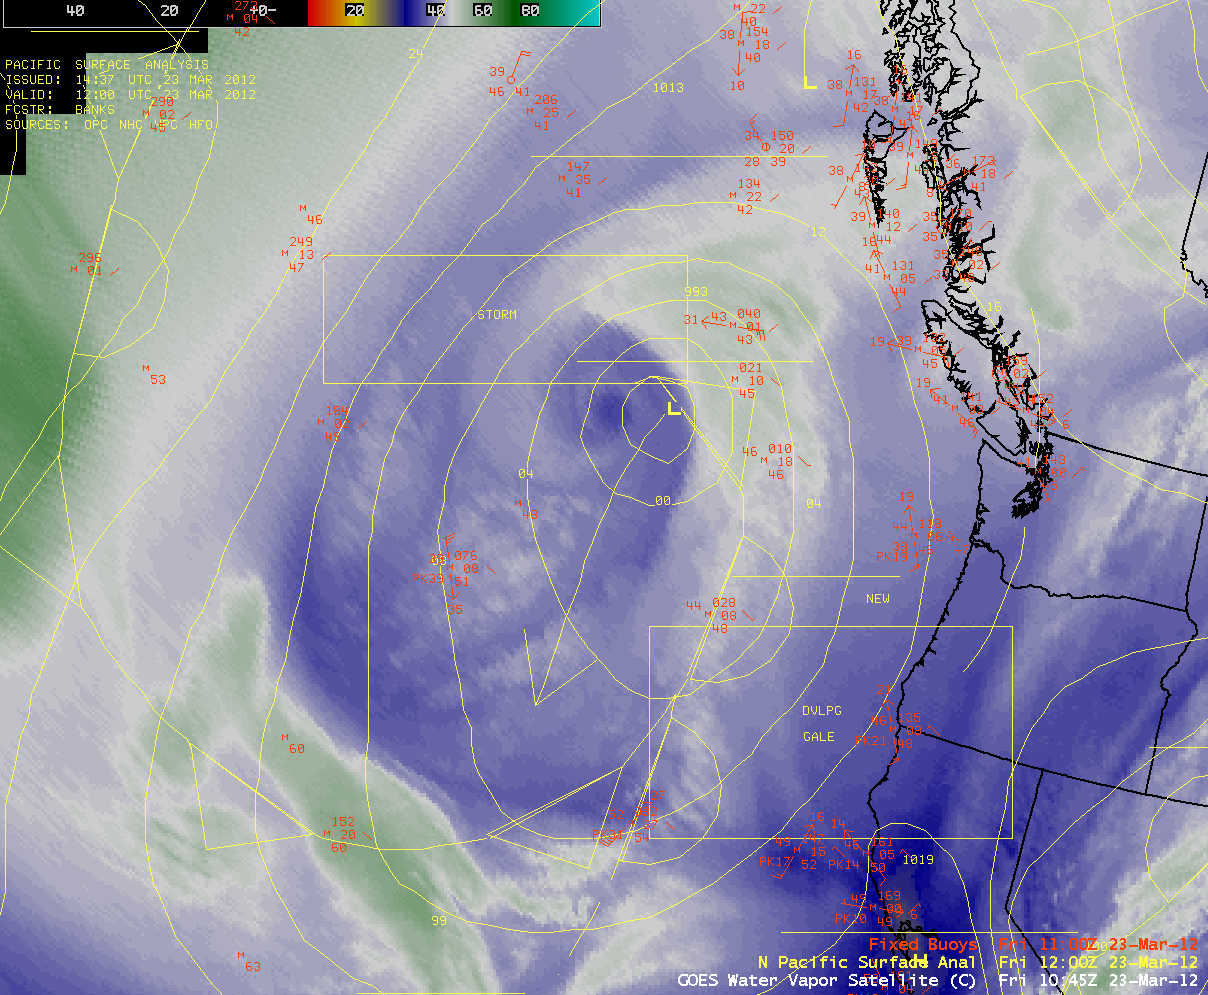 GOES-13 + GOES-15 6.5 Âµm water vapor channel images (with surface analyses and buoy reports)